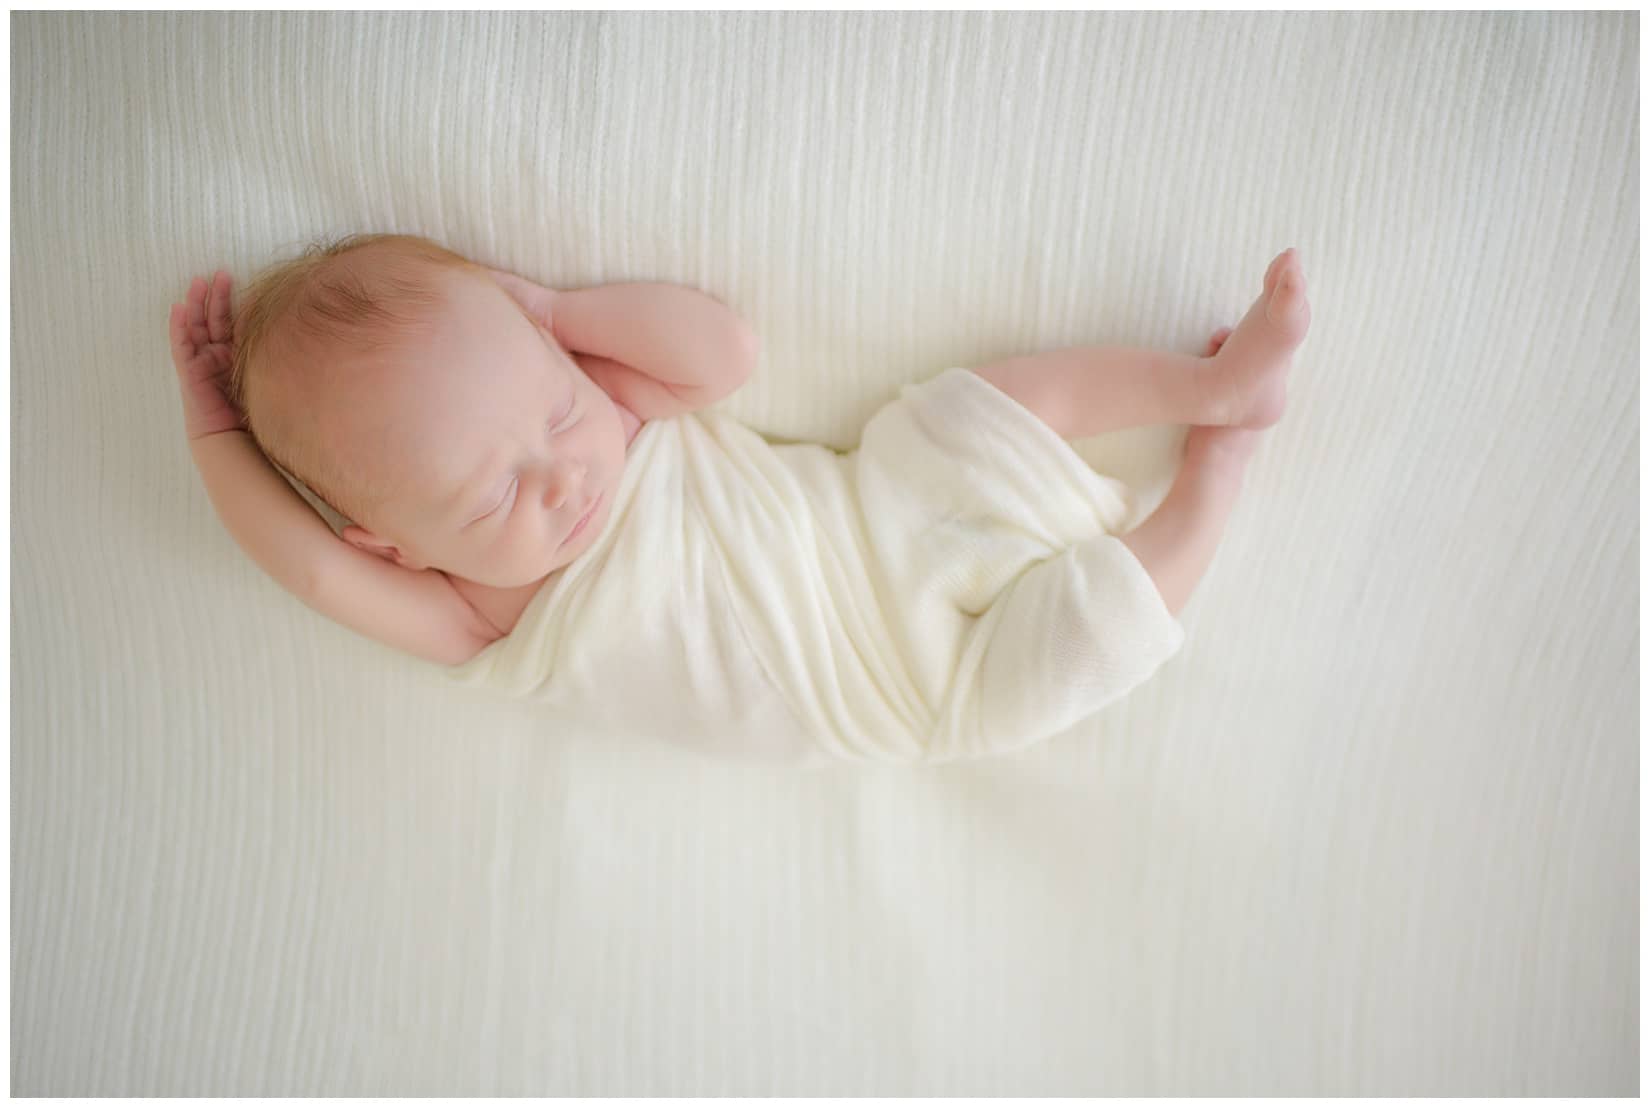 Baby led newborn poses for photograph. Photos by Tiffany Hix Photography.